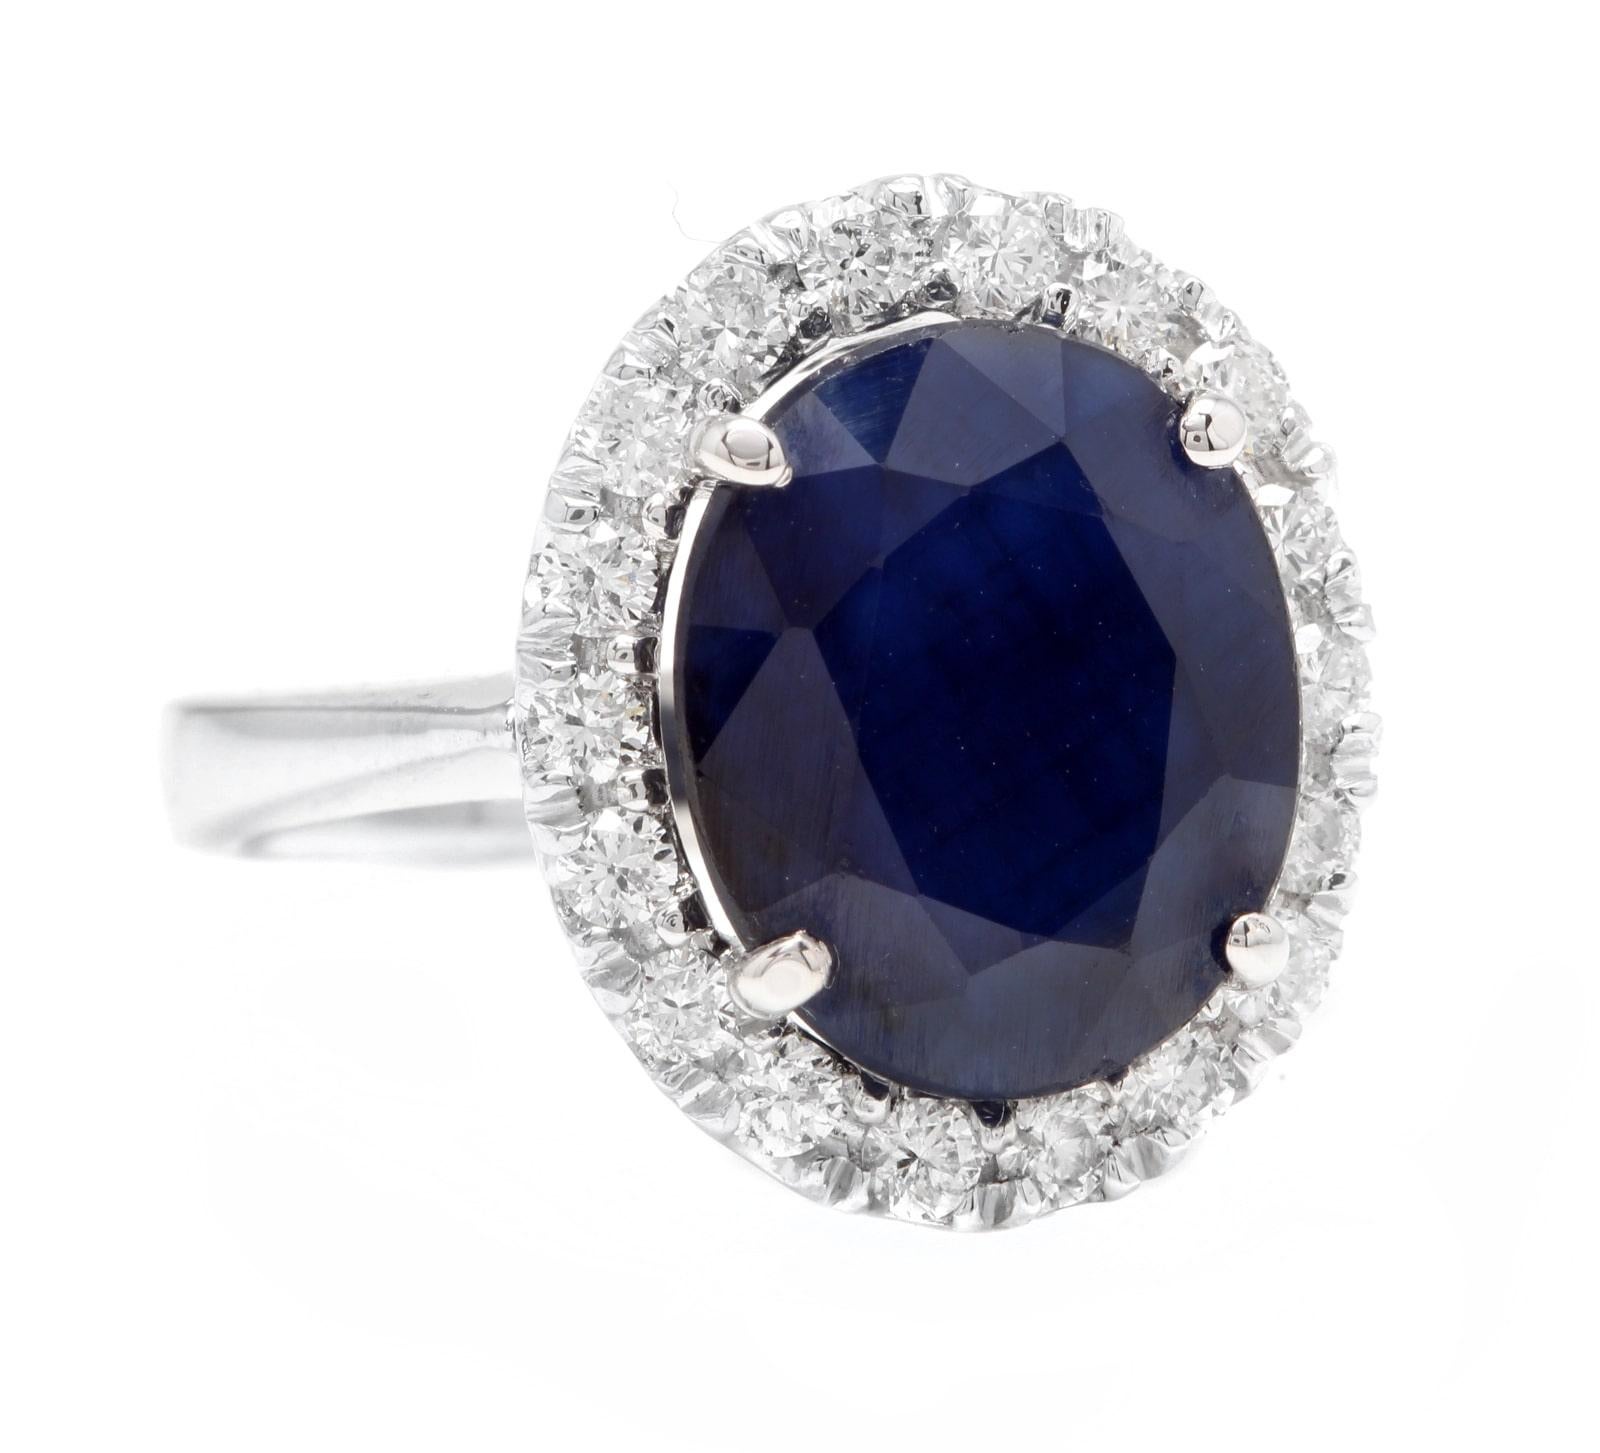 8.80 Carats Natural Sapphire and Diamond 14K Solid White Gold Ring

Stamped: 14K

Total Natural Oval Cut Sapphire Weights: Approx. 8.00 Carats

Sapphire Measures: Approx. 13.00 x 10.00mm

Sapphire Treatment: Diffusion

Natural Round Diamonds Weight: